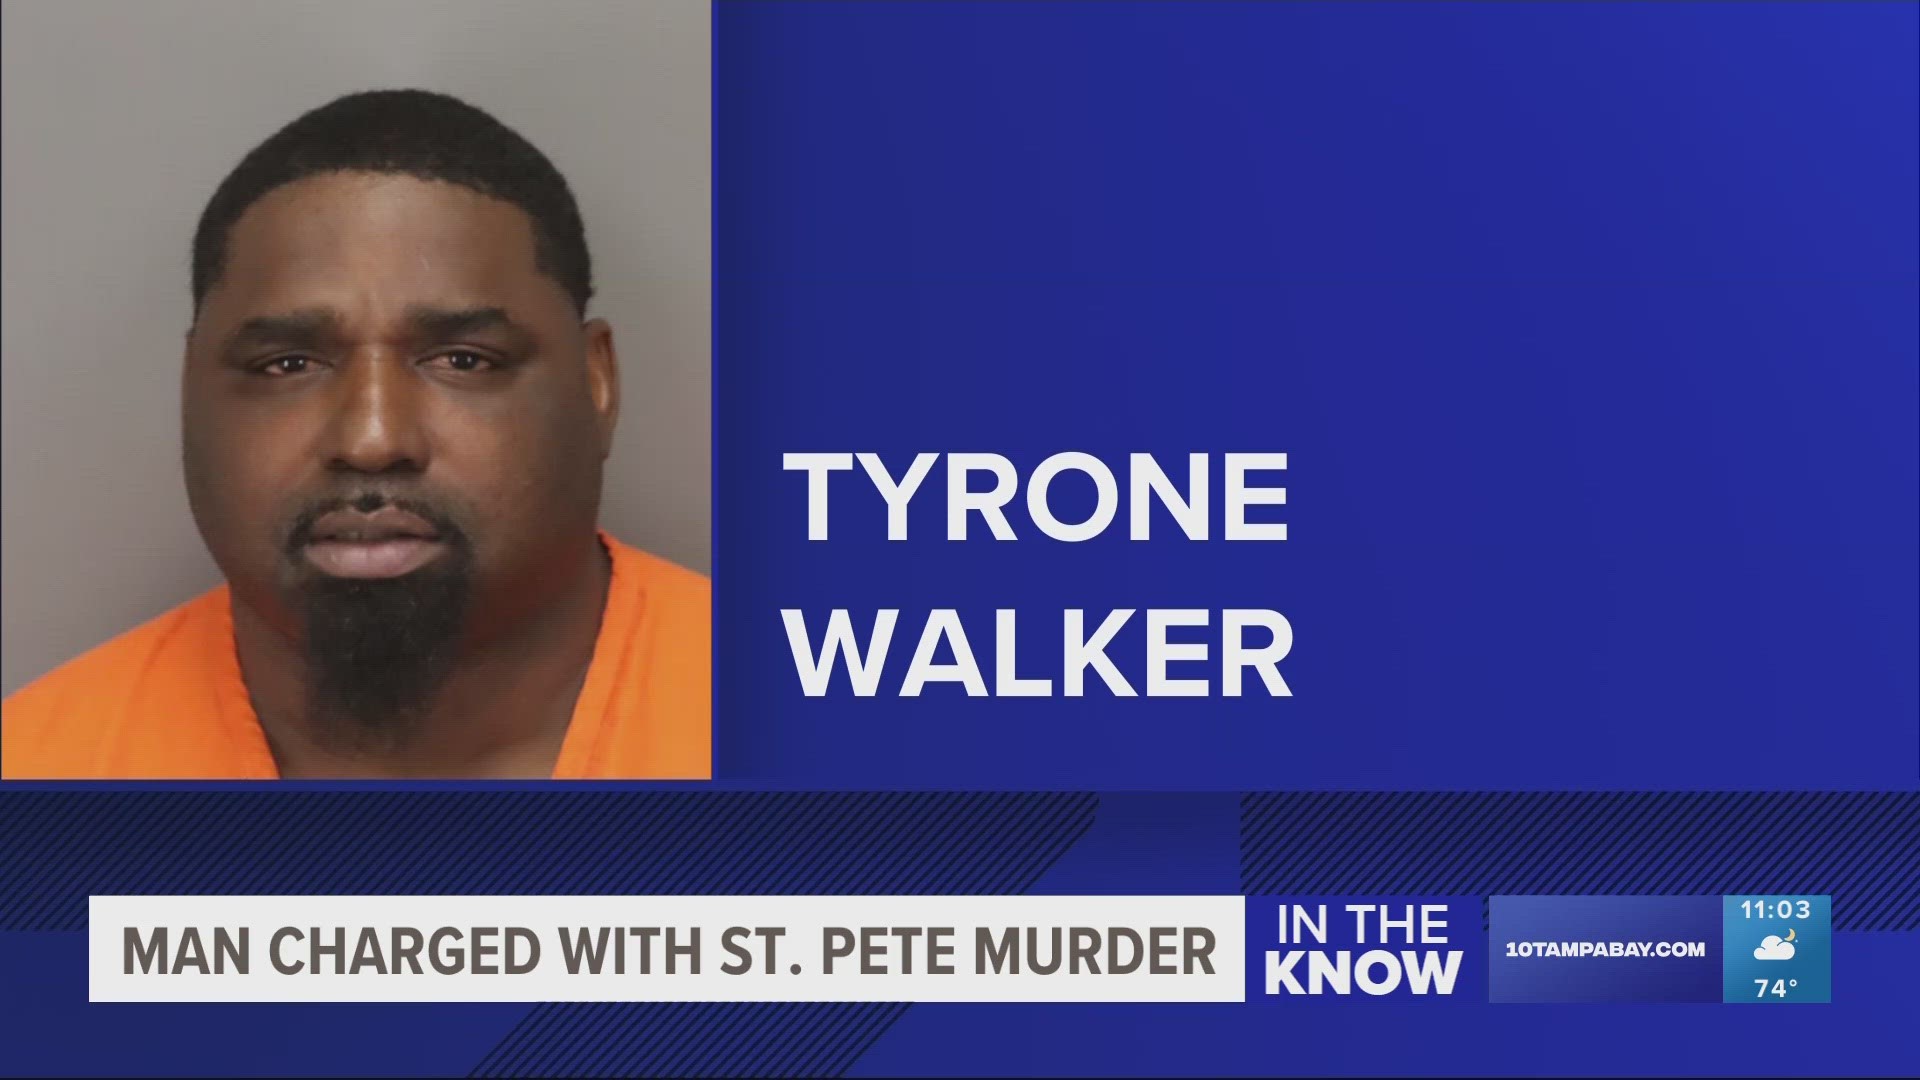 Police say Tyrone Anthony Walker met with Devontae Lawson, 45, on Thursday, they had an argument and Walker shot and killed Lawson.